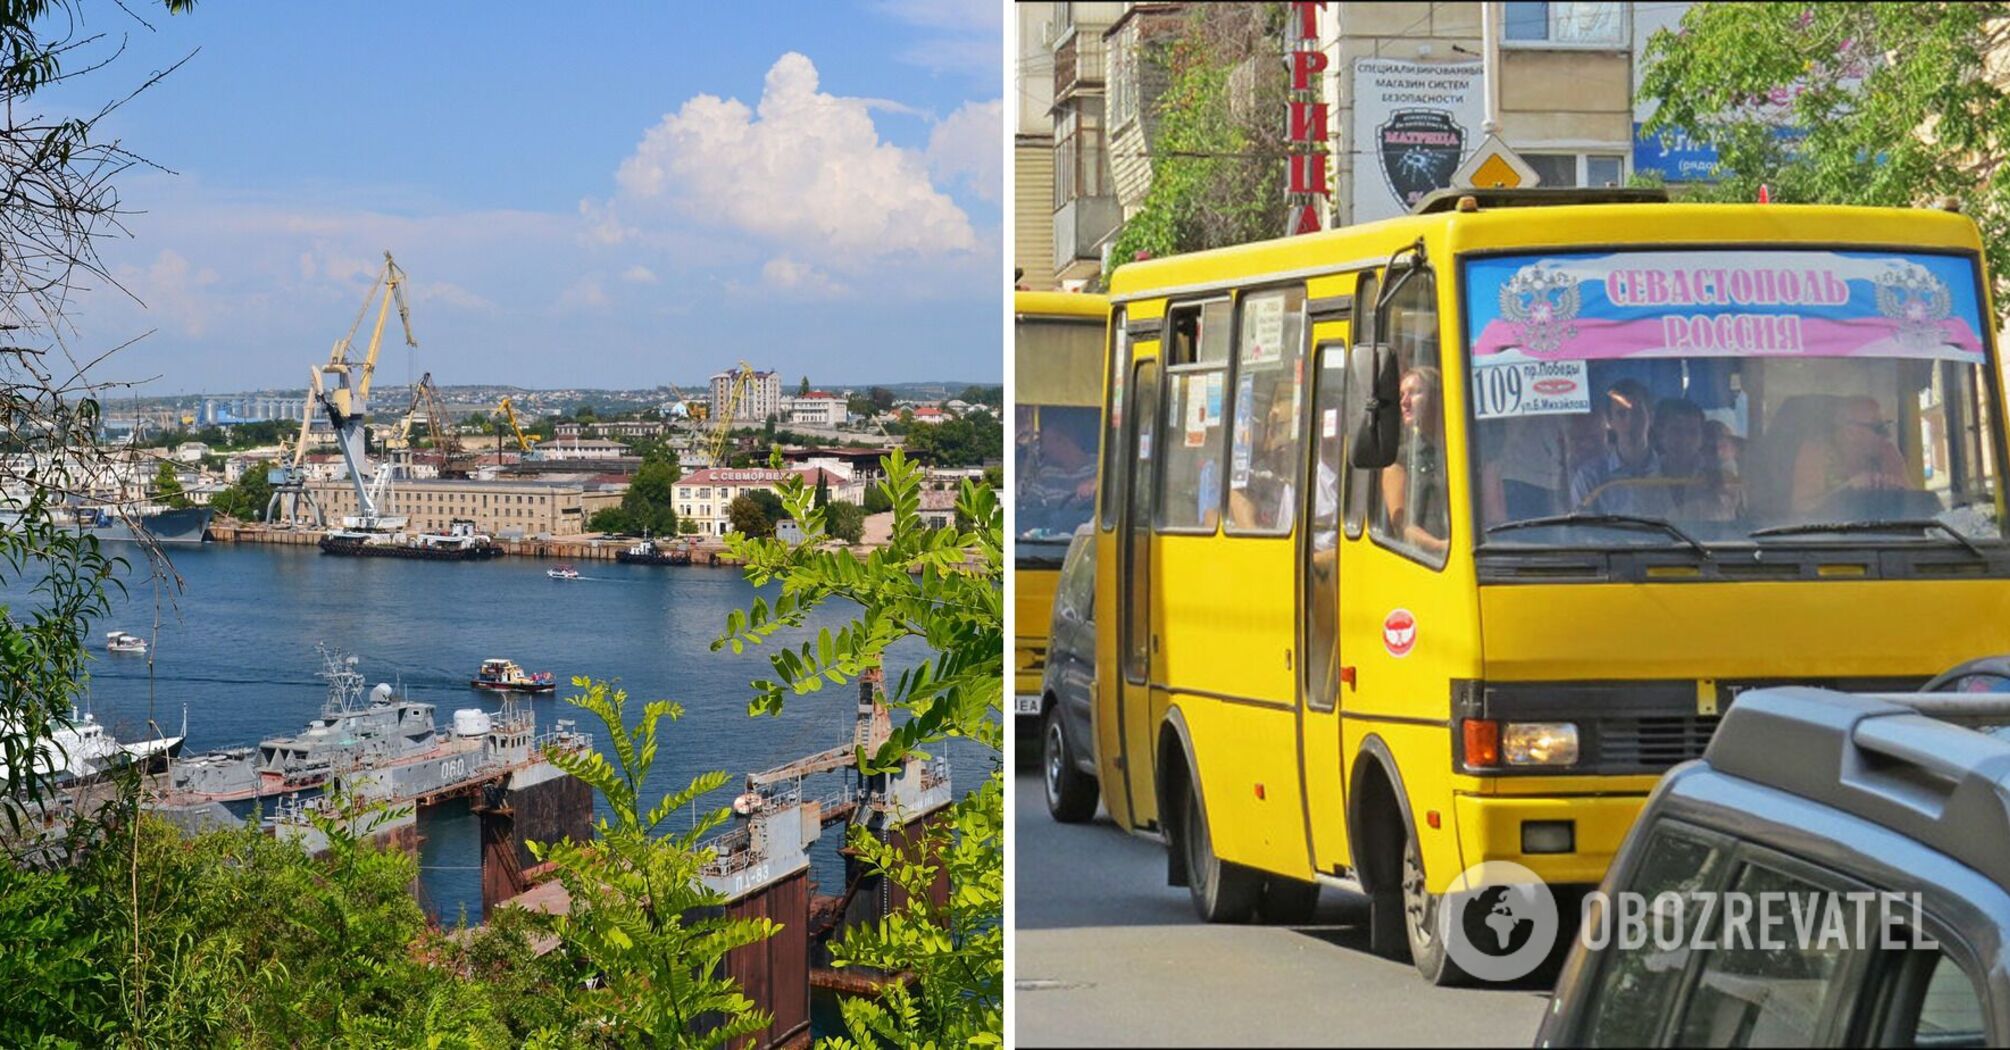 A conflict broke out in a trolleybus in Sevastopol over the Russian anthem. Video